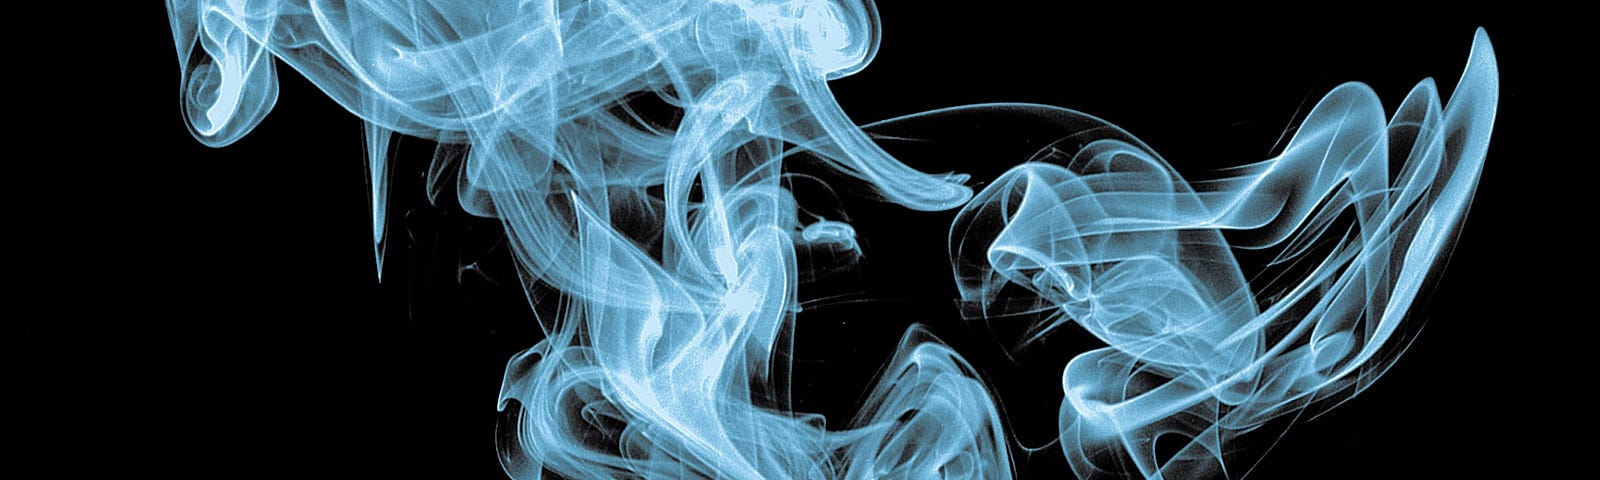 Curls of white cigarette smoke against a black background